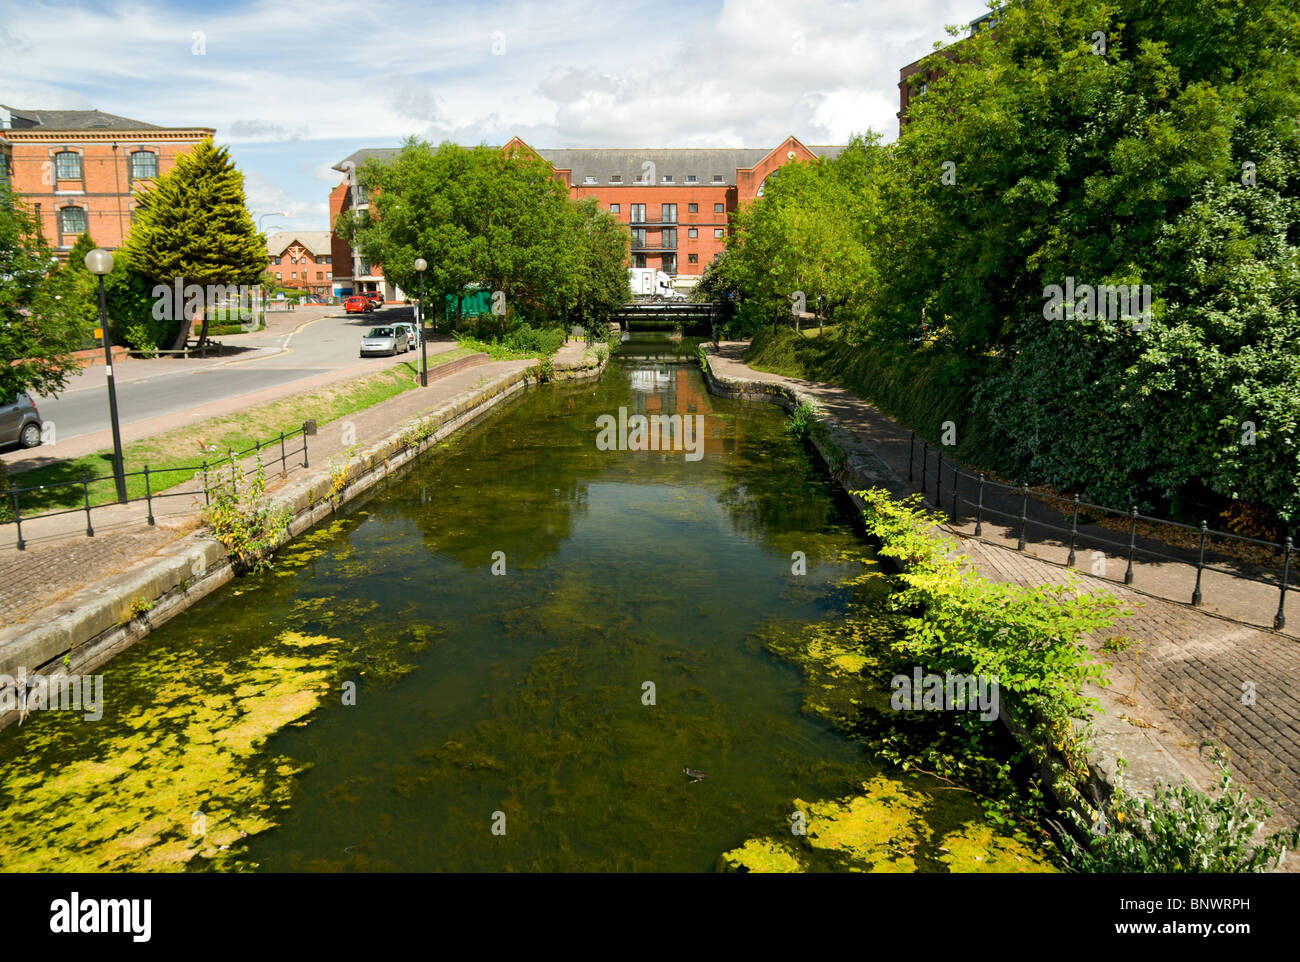 Canal Tyndall Street Industrial Estate known as Little Venice,  Cardiff, South Wales, UK. Stock Photo